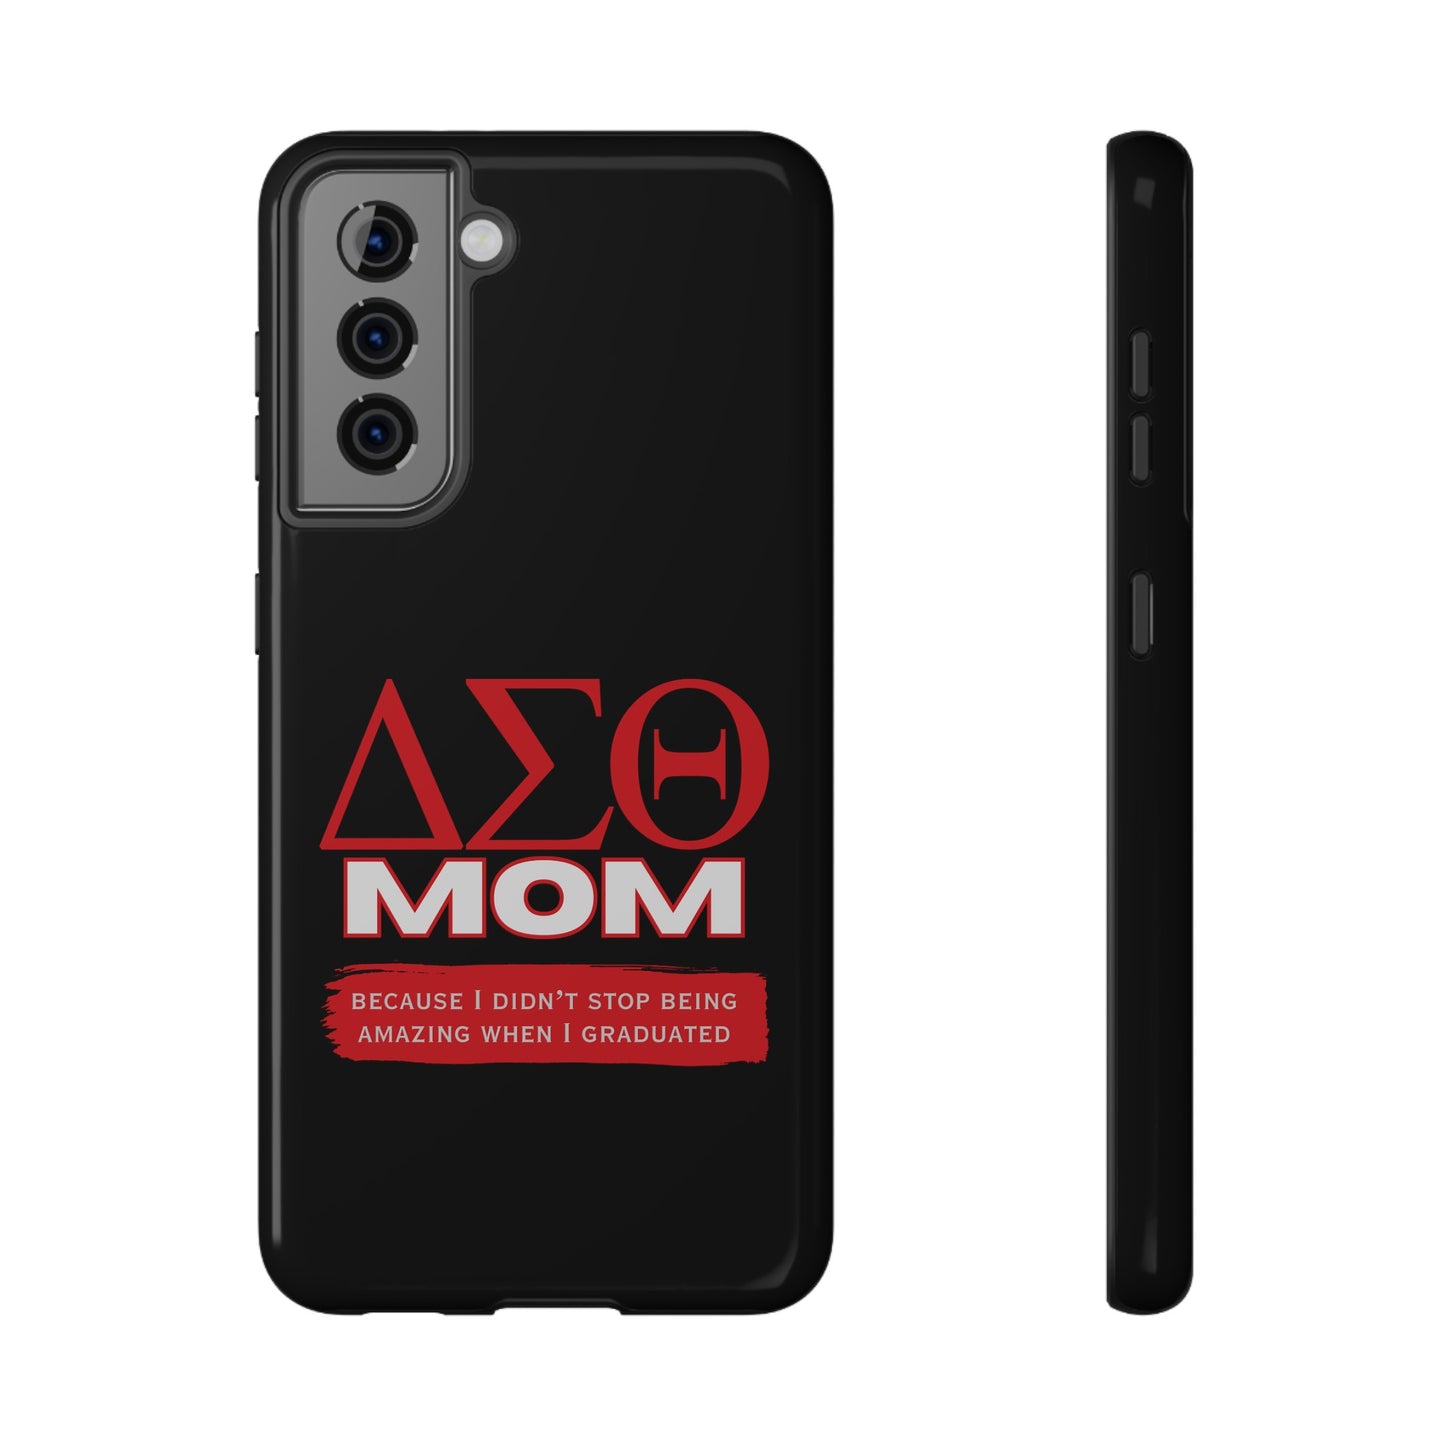 Delta Sigma Theta iPhone and Samsung Impact-Resistant Phone Cases